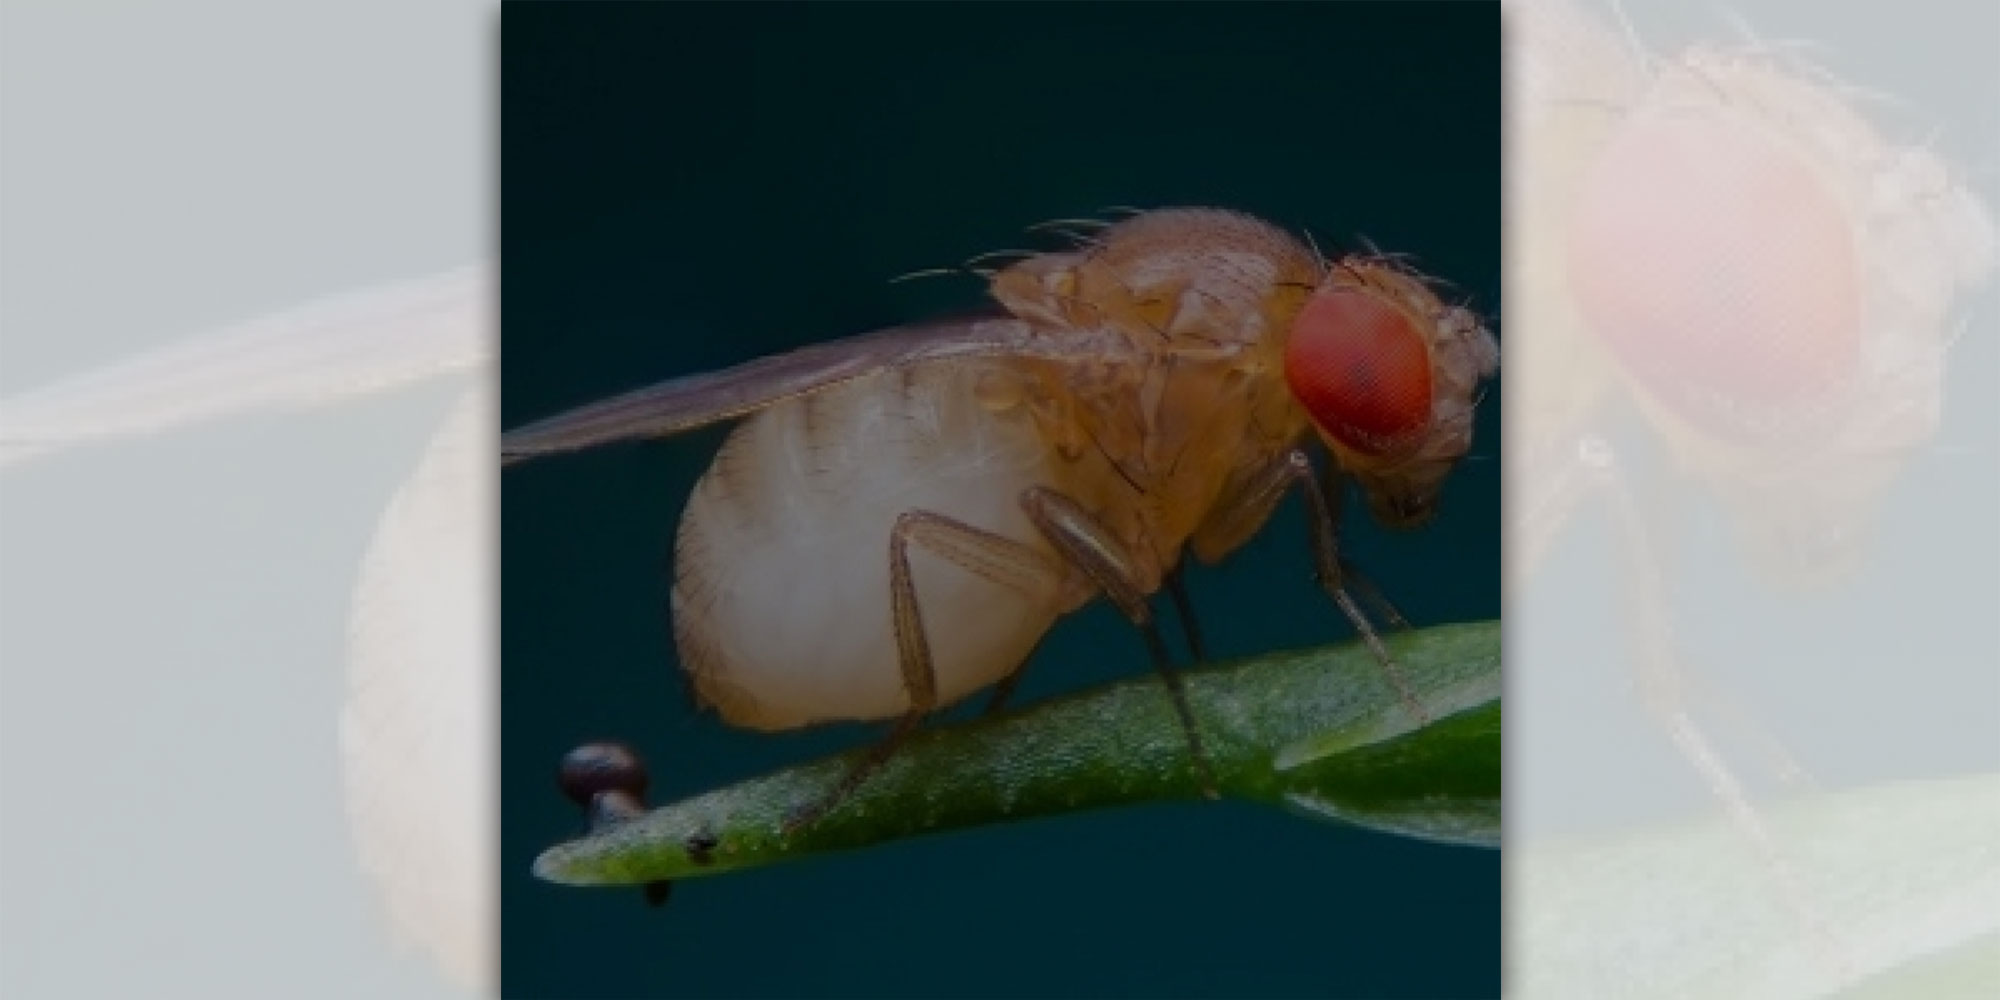 Wasn’t there food around here?: An Agent-based Model for Local Search in Drosophila